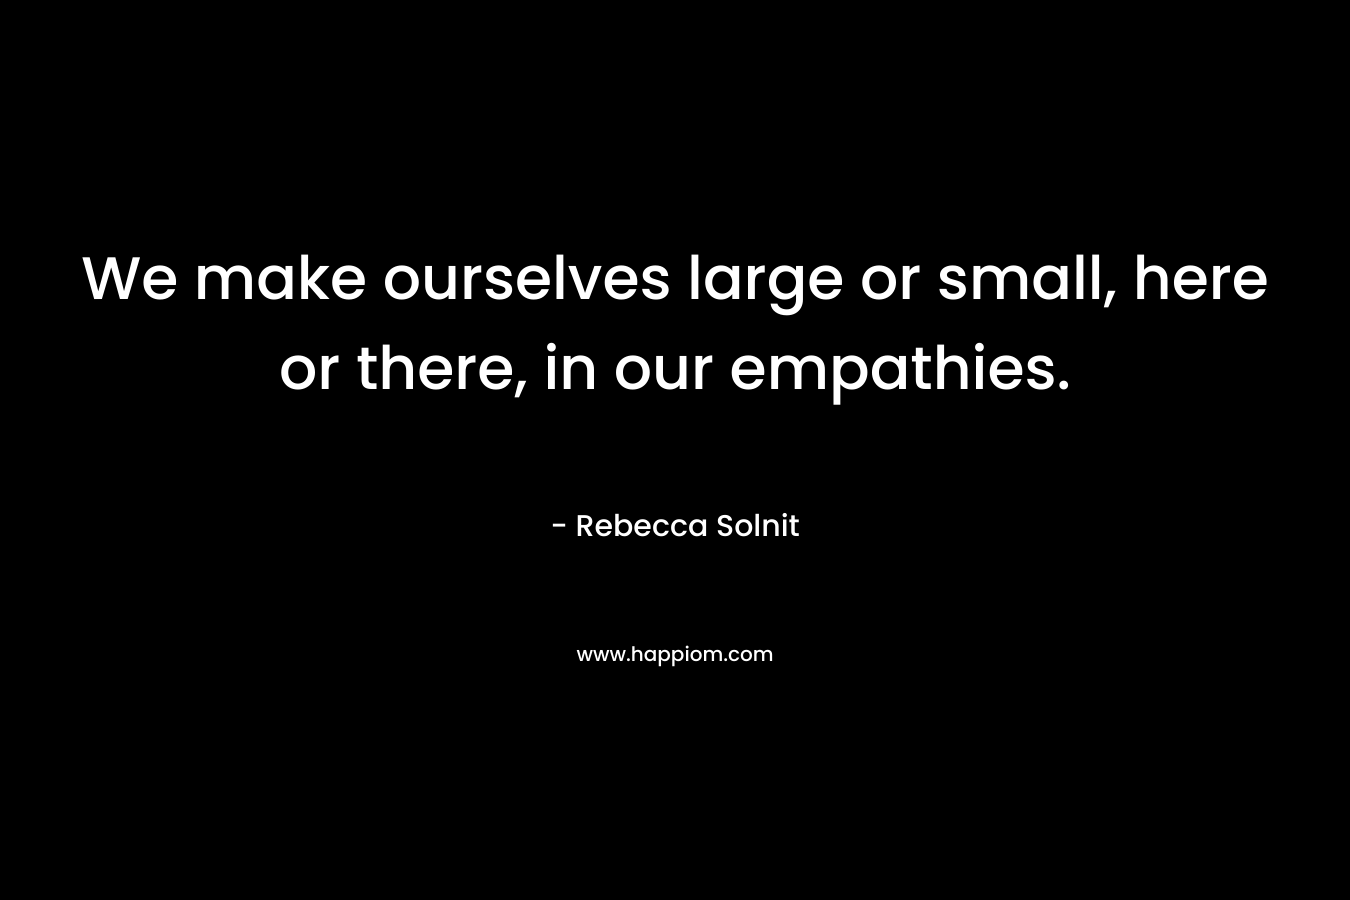 We make ourselves large or small, here or there, in our empathies. – Rebecca Solnit